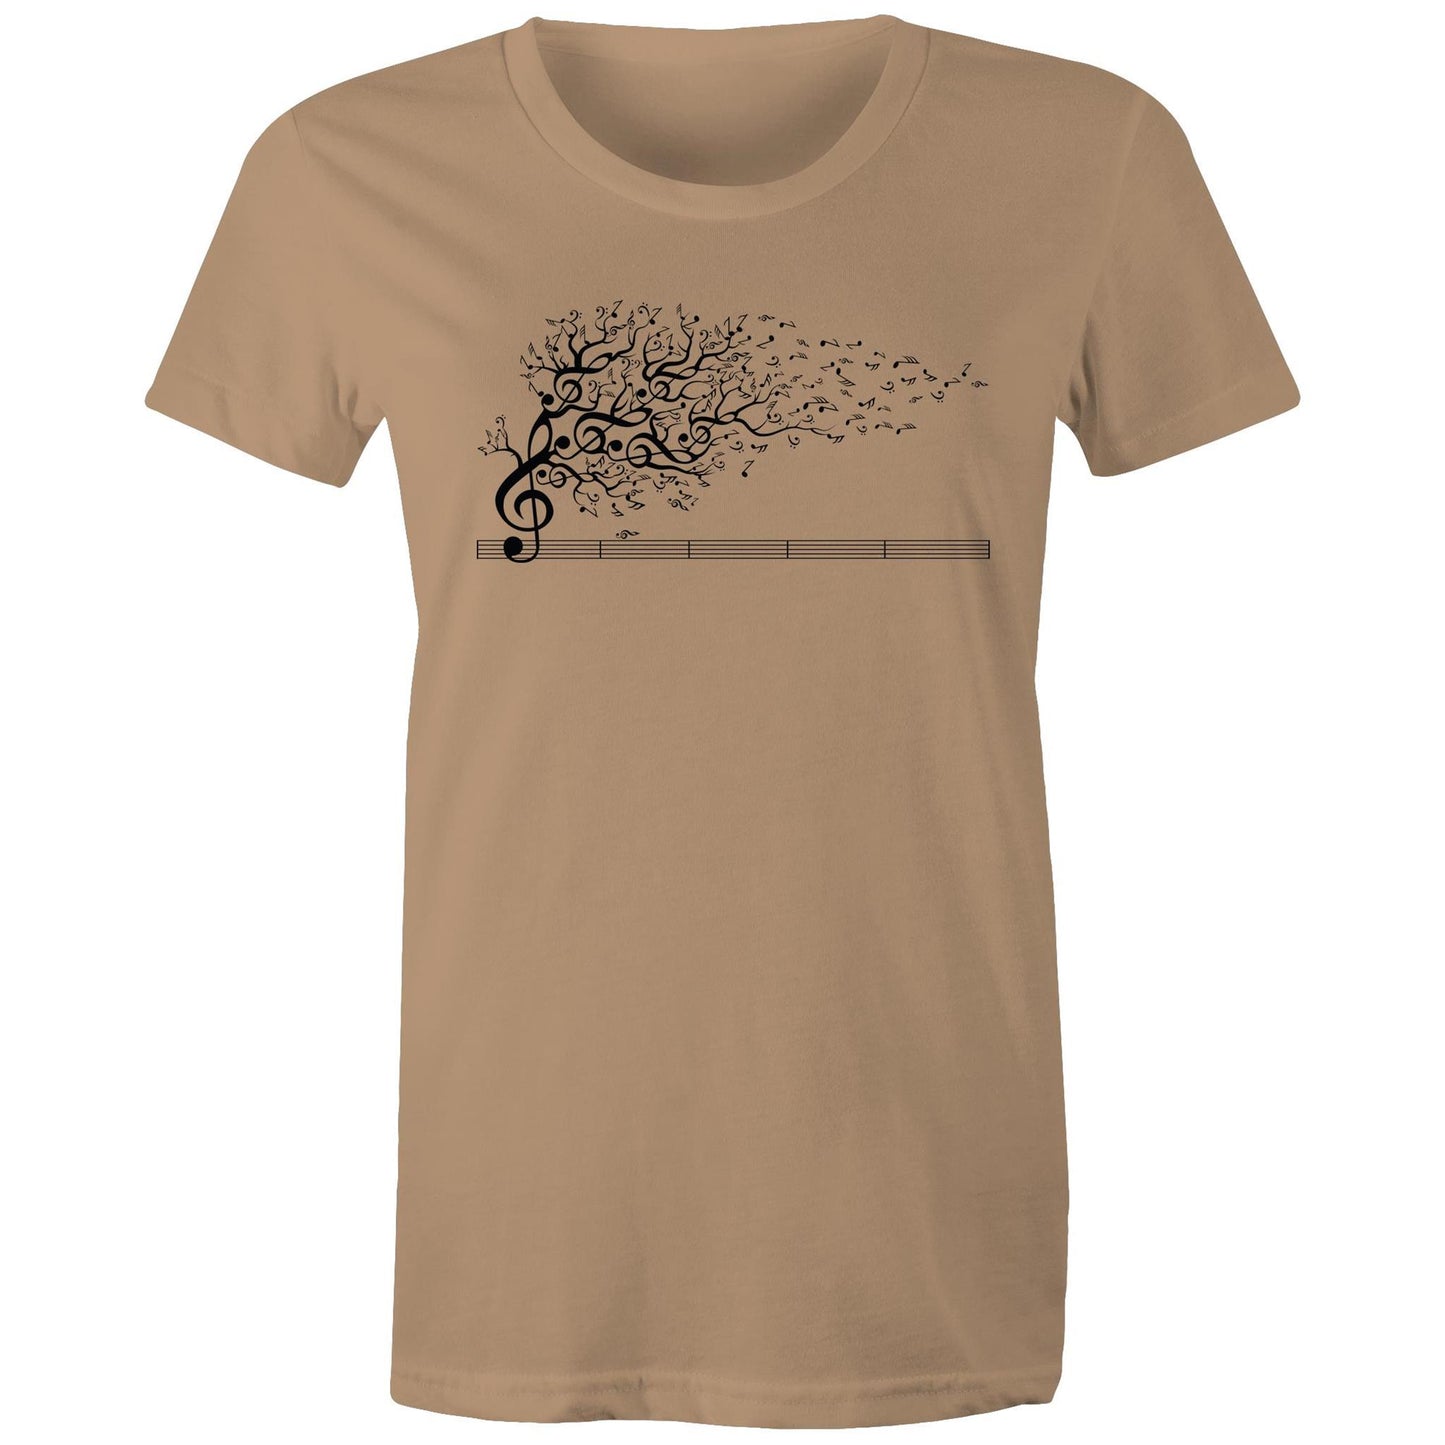 The Sound of Nature - Women's T-Shirt